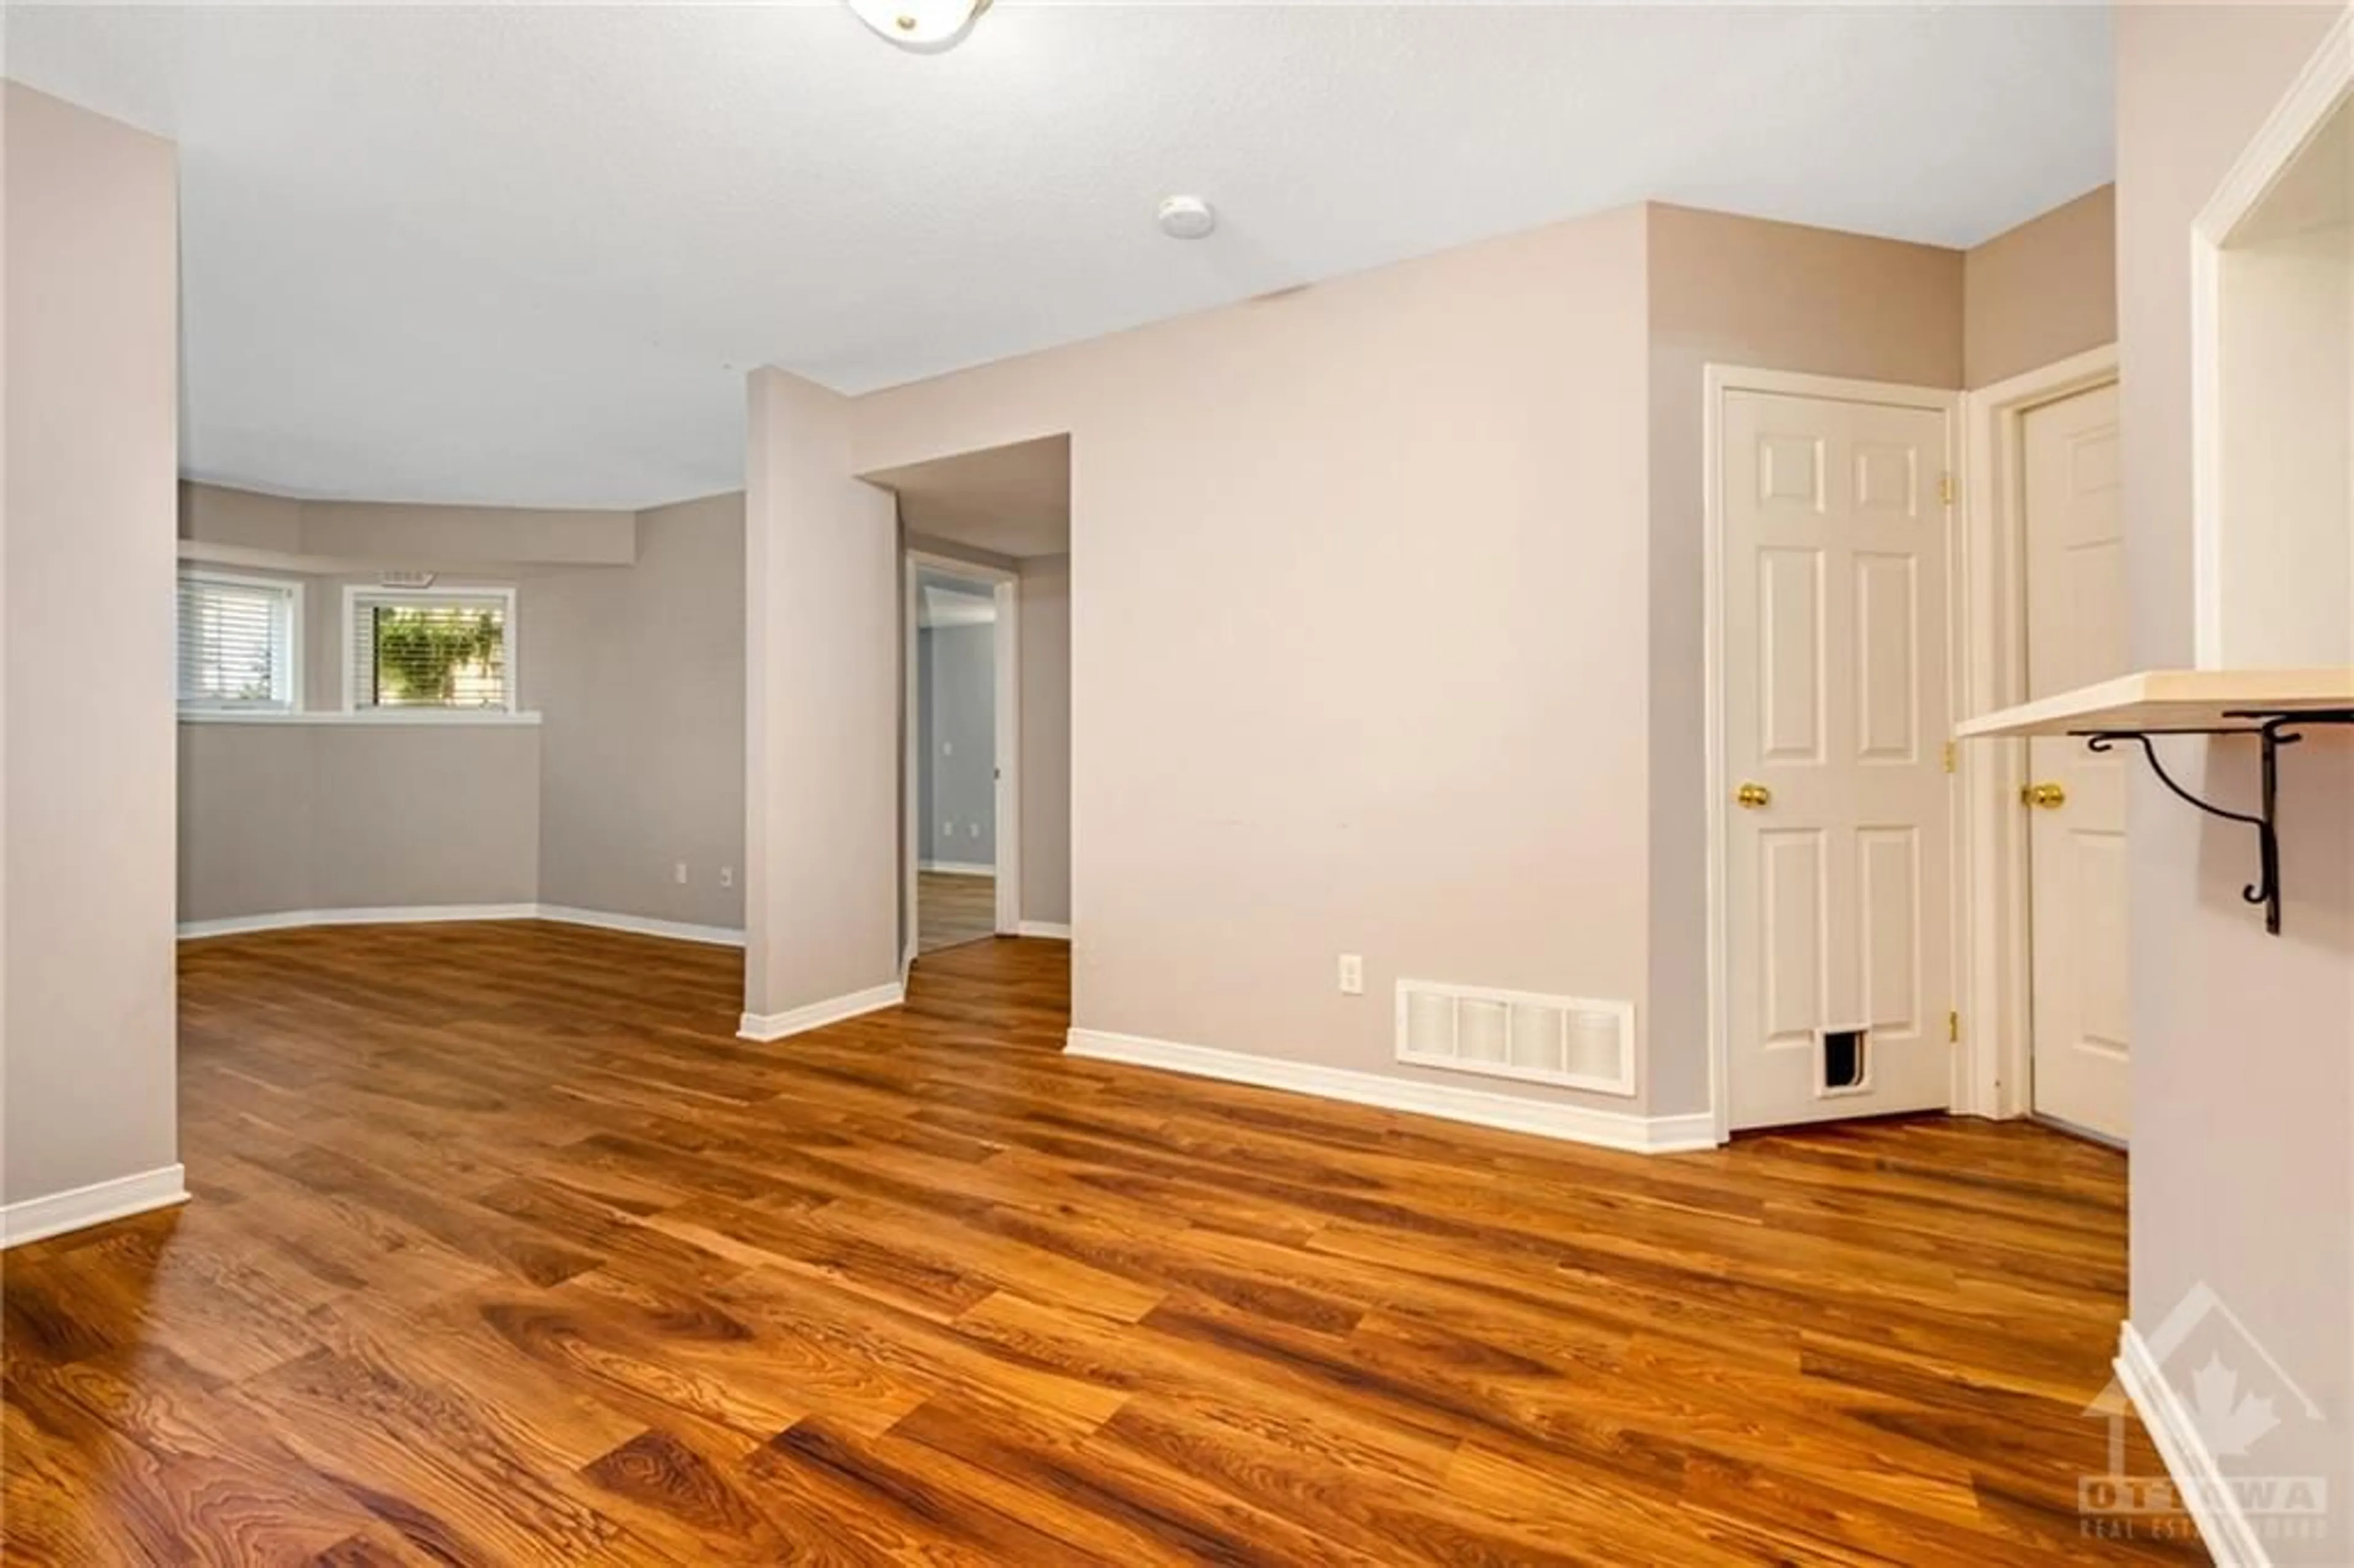 Indoor entryway for 50 BRIARGATE Pvt #1, Orleans Ontario K4C 0C3